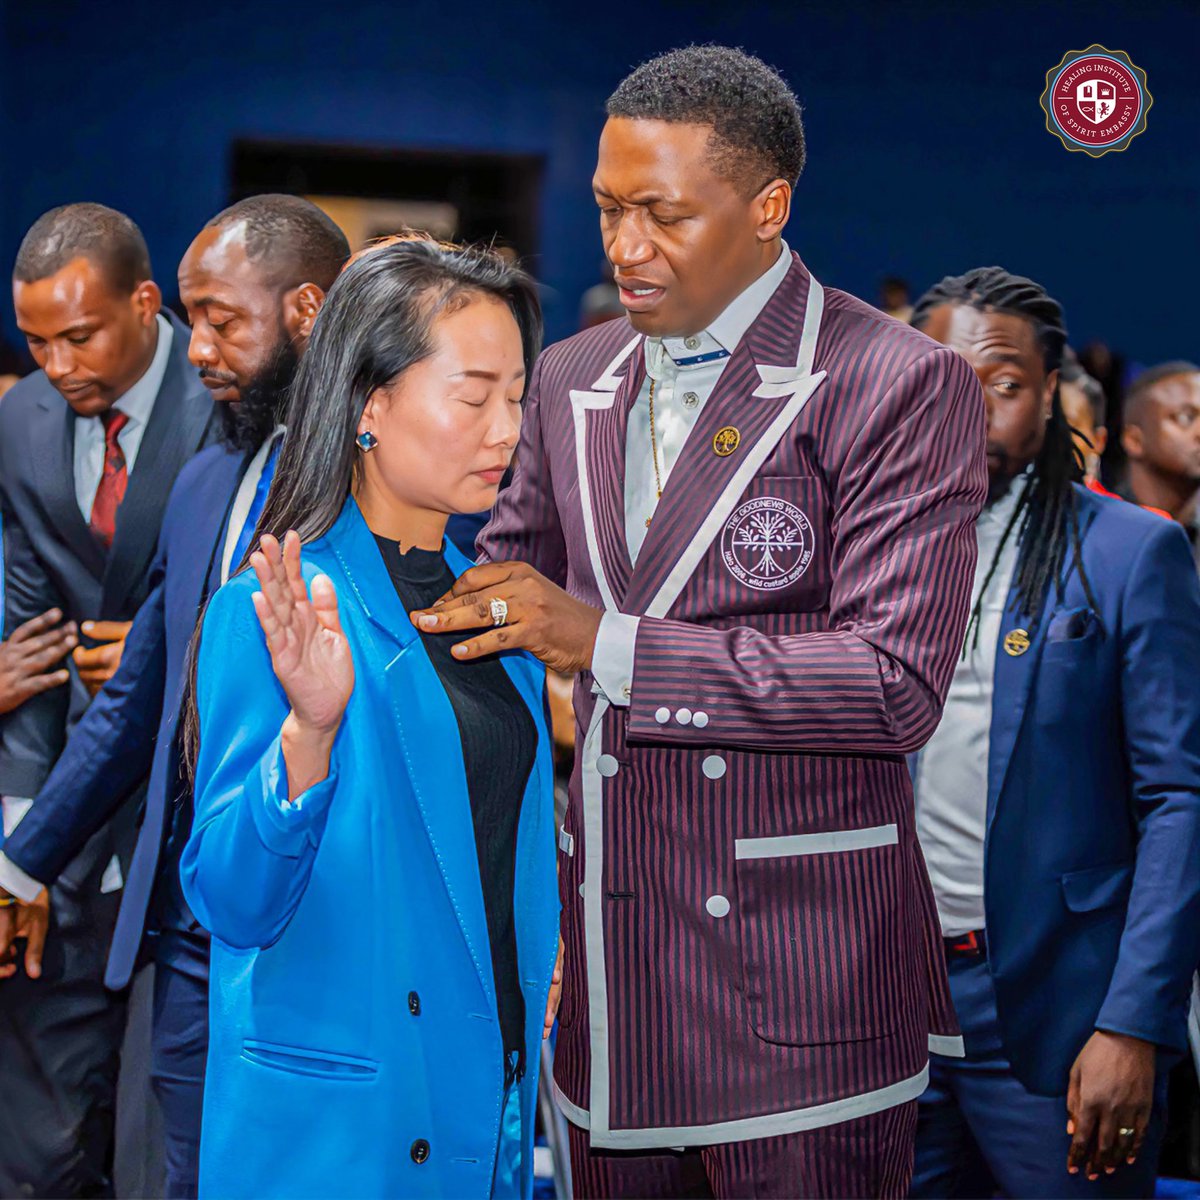 I have comprehensive immunity to disease, sickness and infirmity. My body neutralises anything that is contrary to the Word of God. My health is eternal in Jesus’ name. 

#uebertangel #healinginstitute #healing #milkandhoney #affirmation